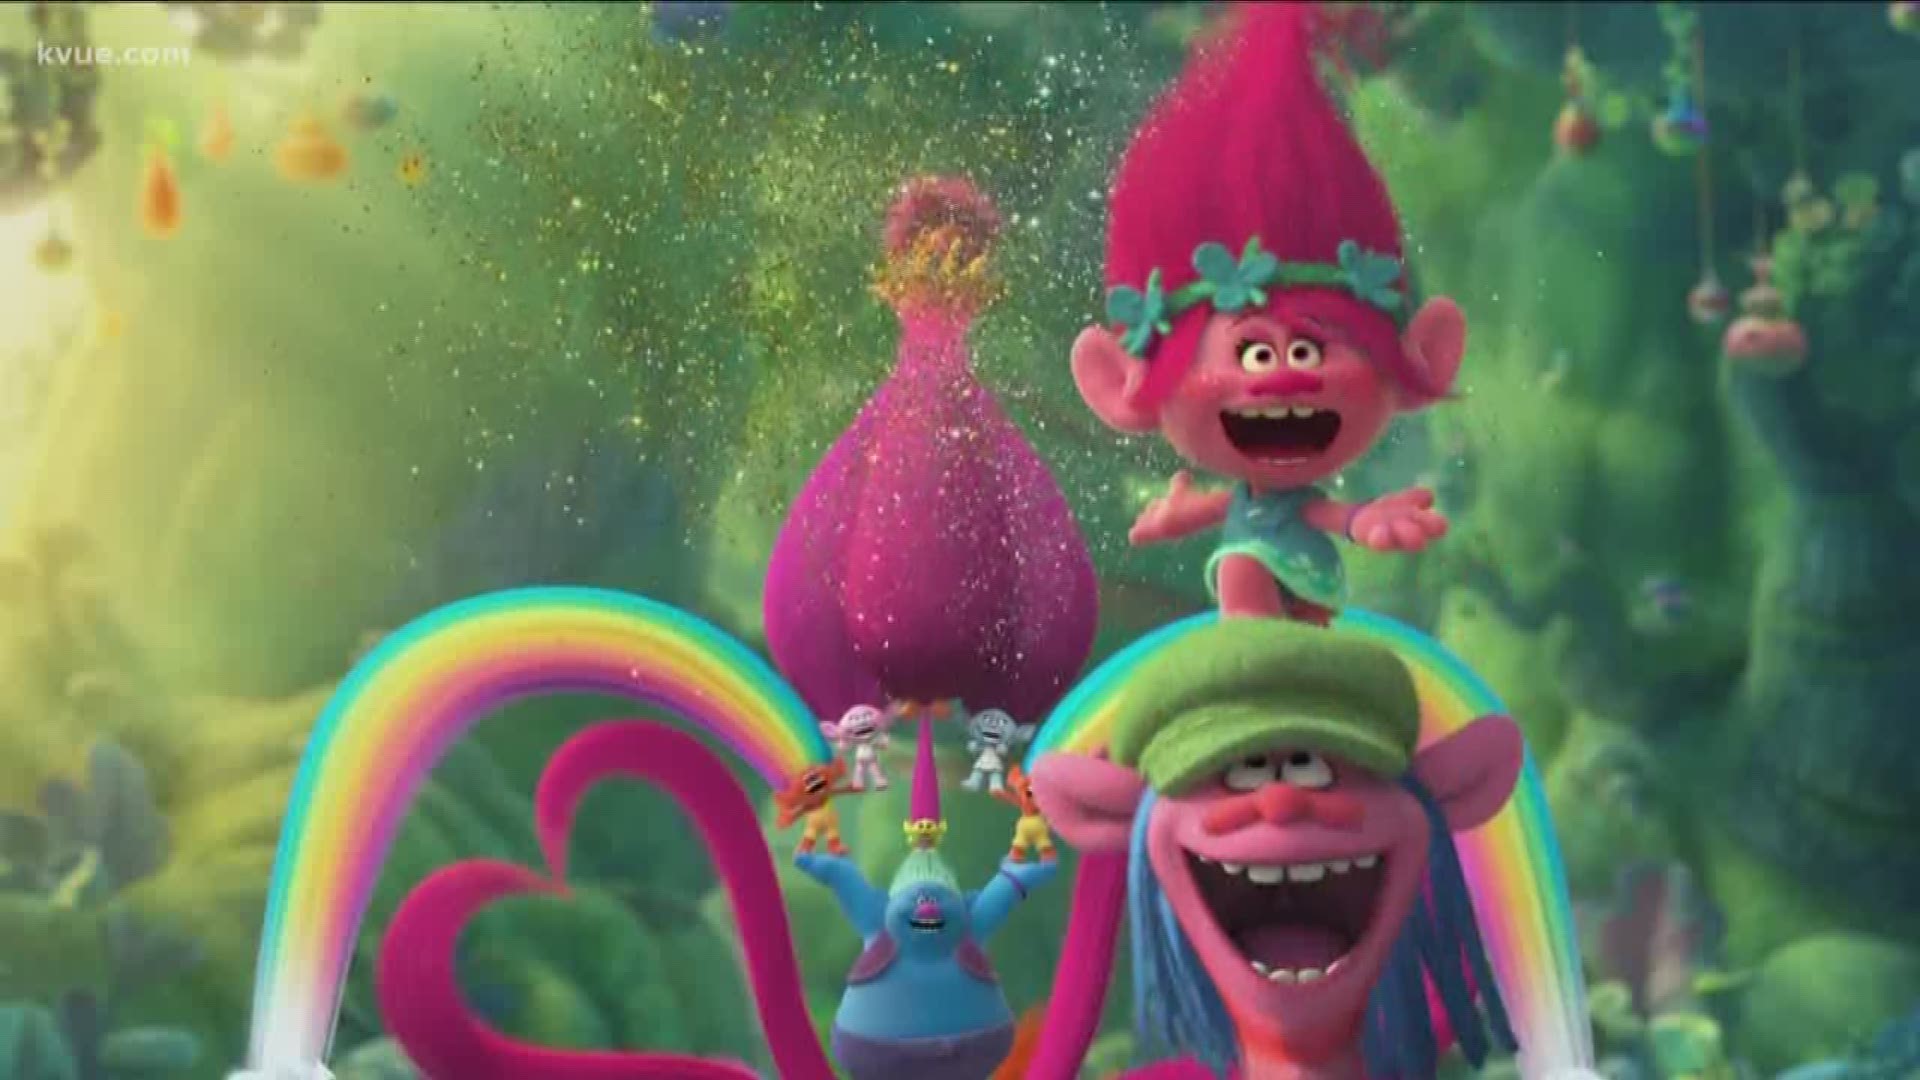 If you have a Trolls fan at home, your kiddo has a chance to see the Trolls live in Austin on Jan. 31.